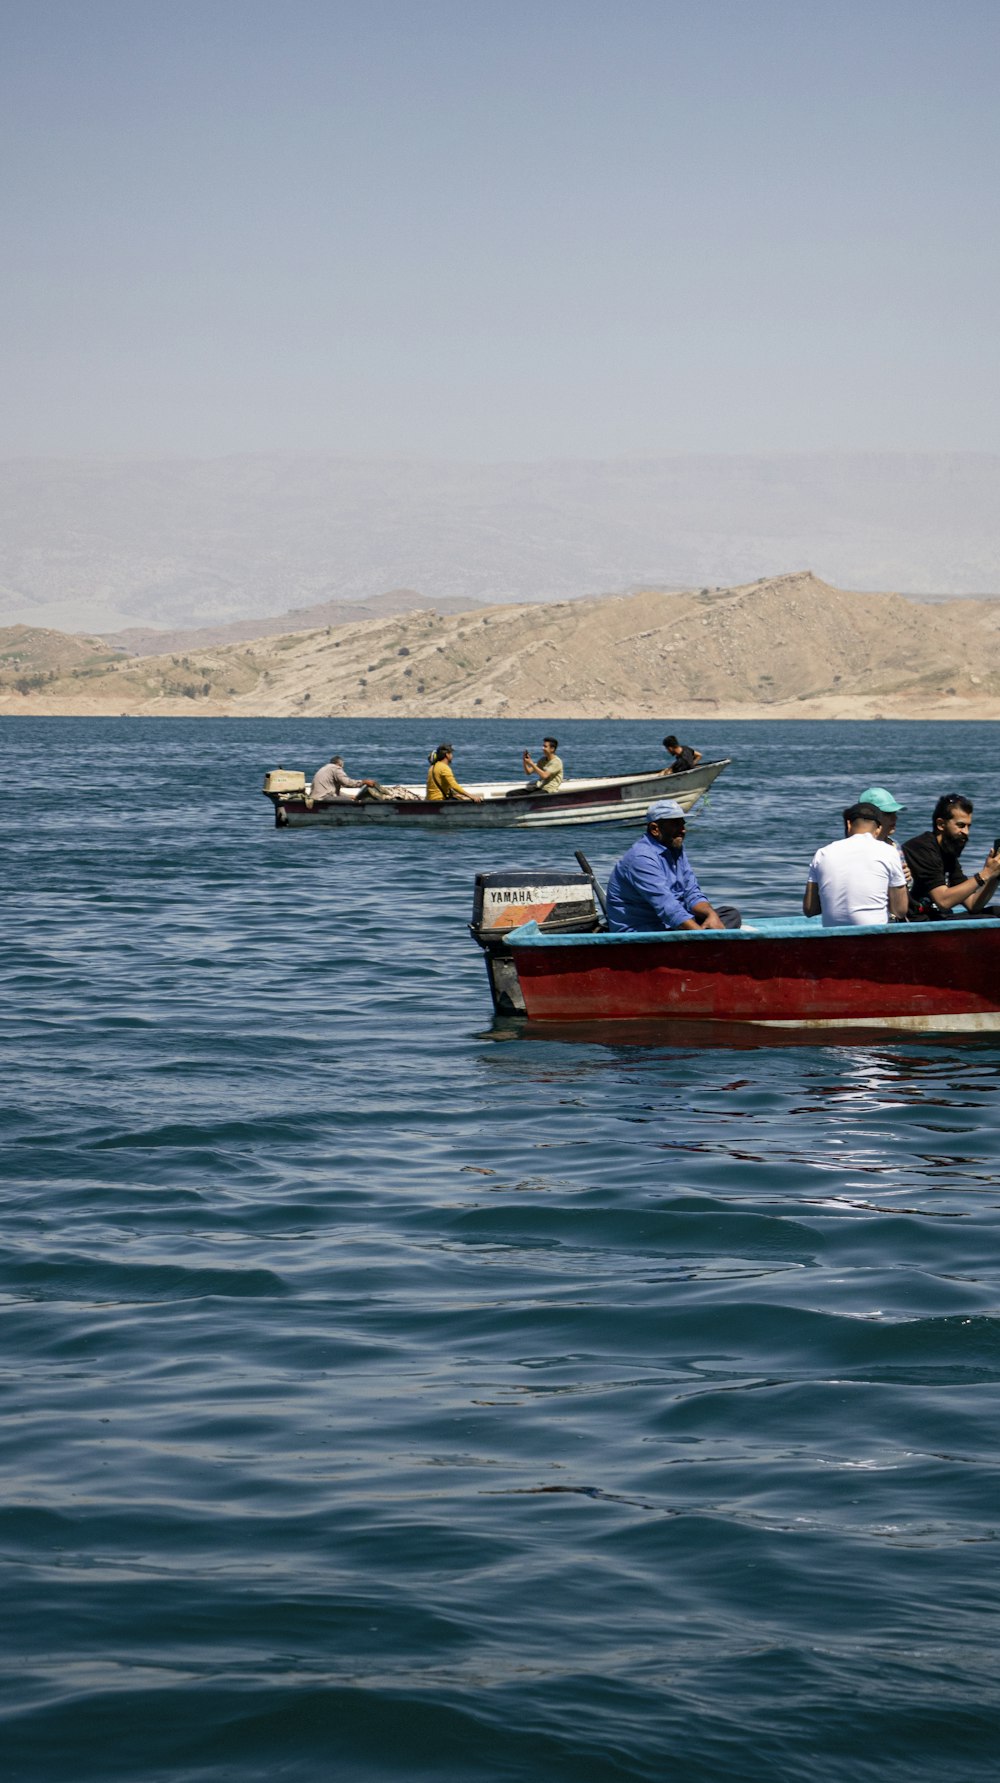 a group of people in a small boat on the water